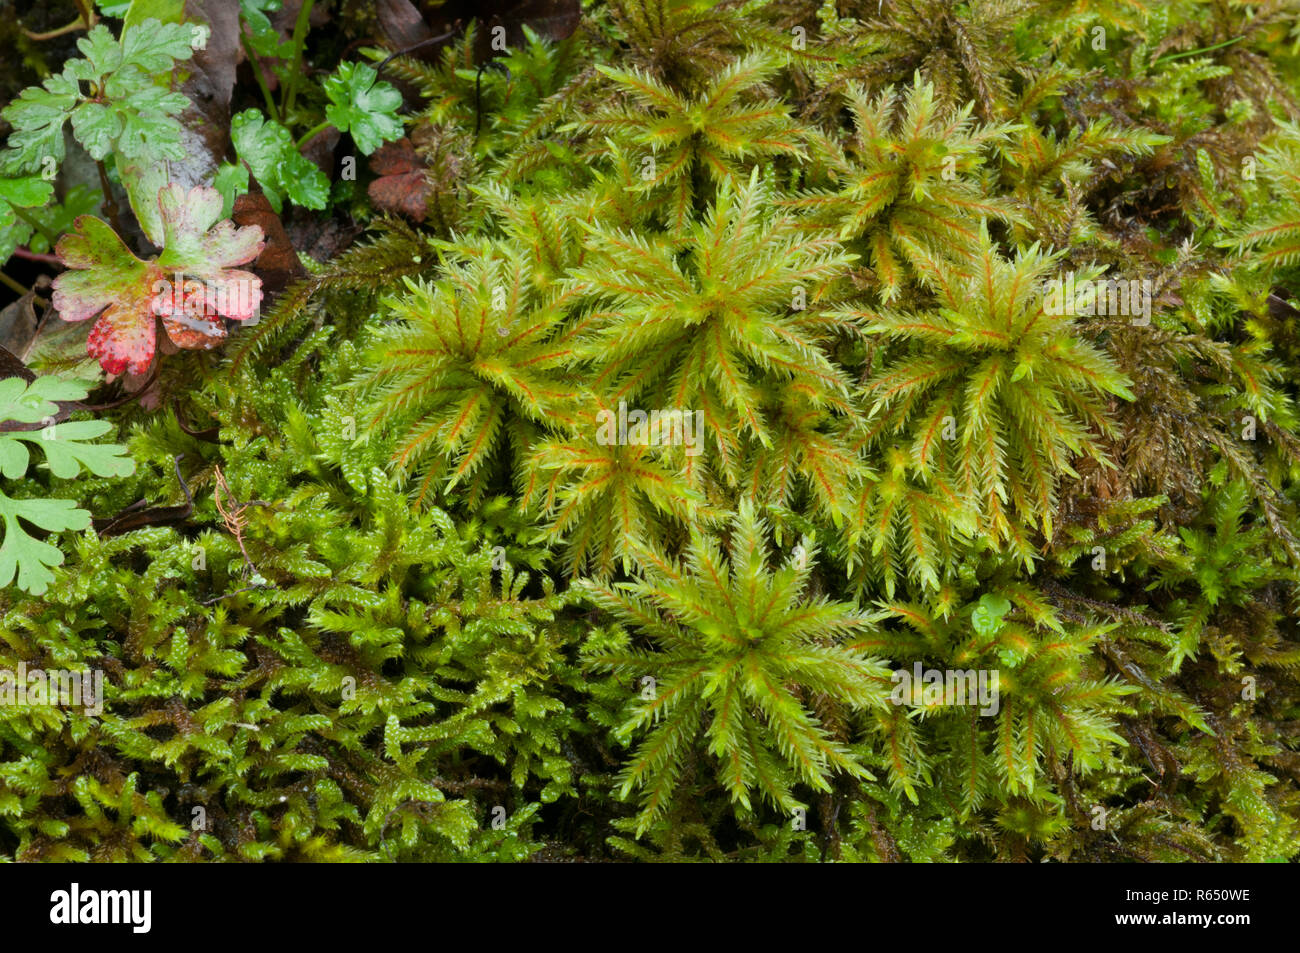 Tree moss (Climacium dendroides) growing on a rotting tree stump in the White Peak, Peak District National Park, Emgland Stock Photo